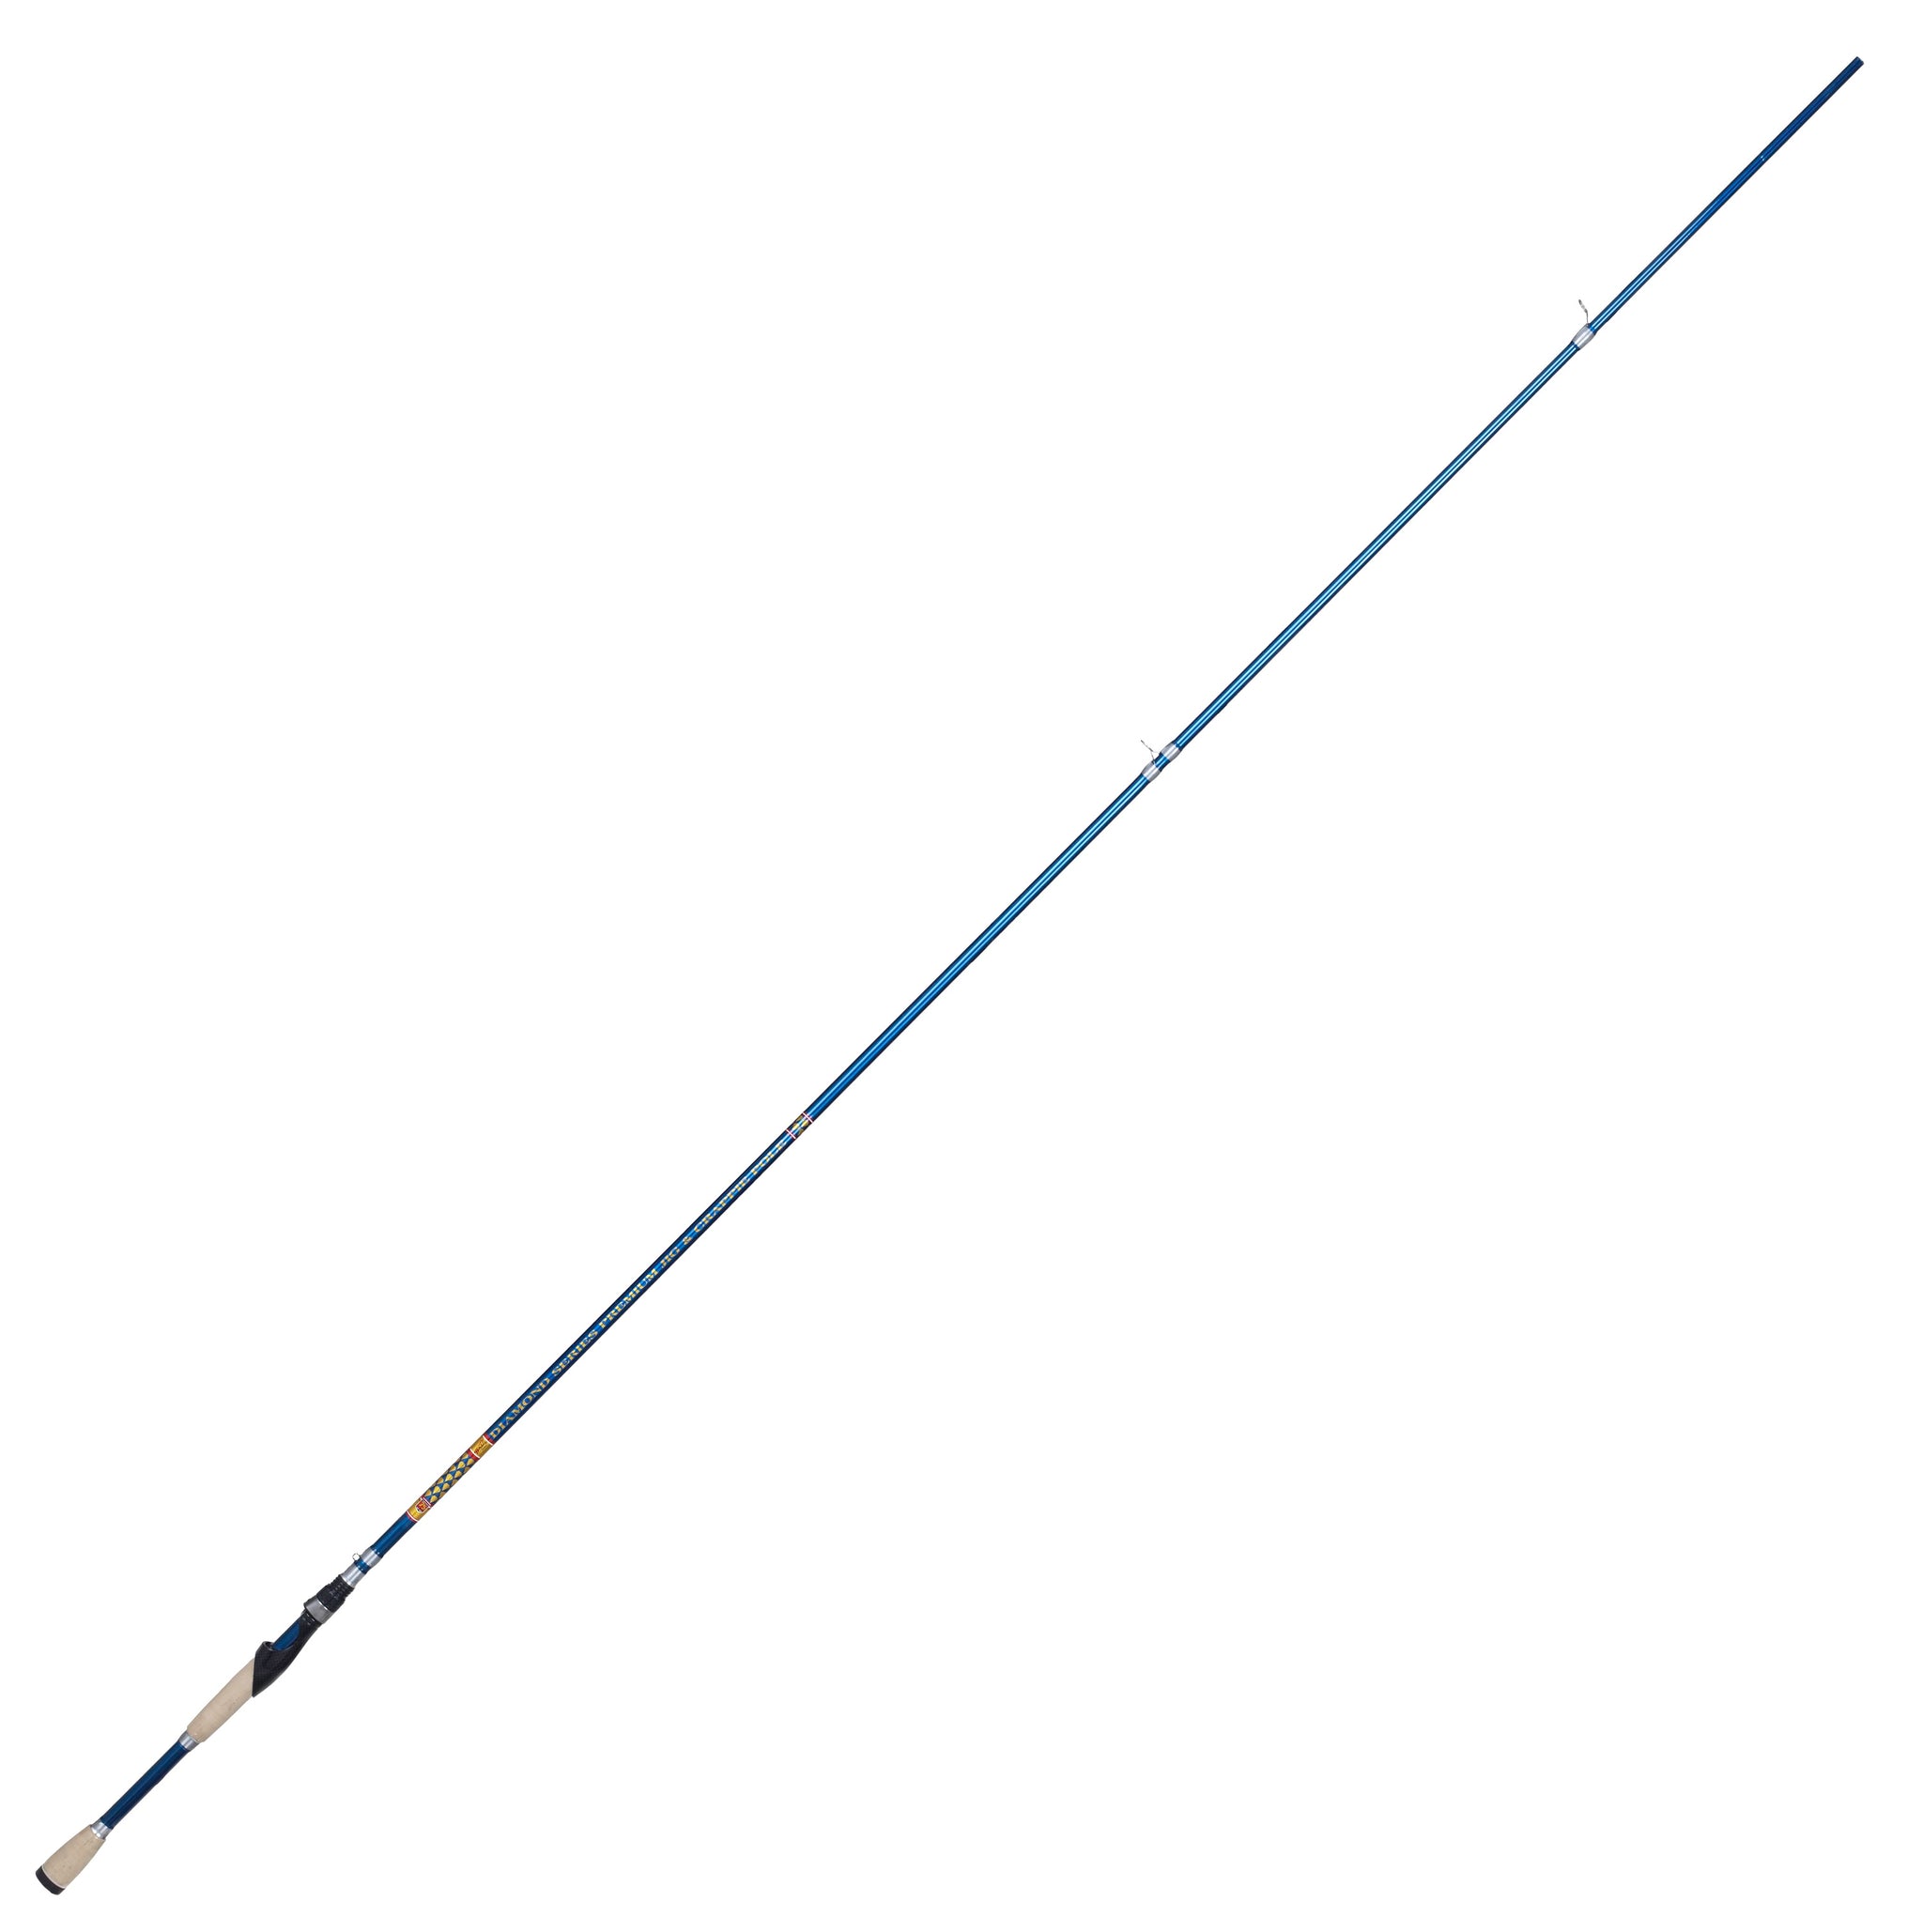 13 Fishing Rod Casting 7 ft 1 in Item Fishing Rods & Poles for sale